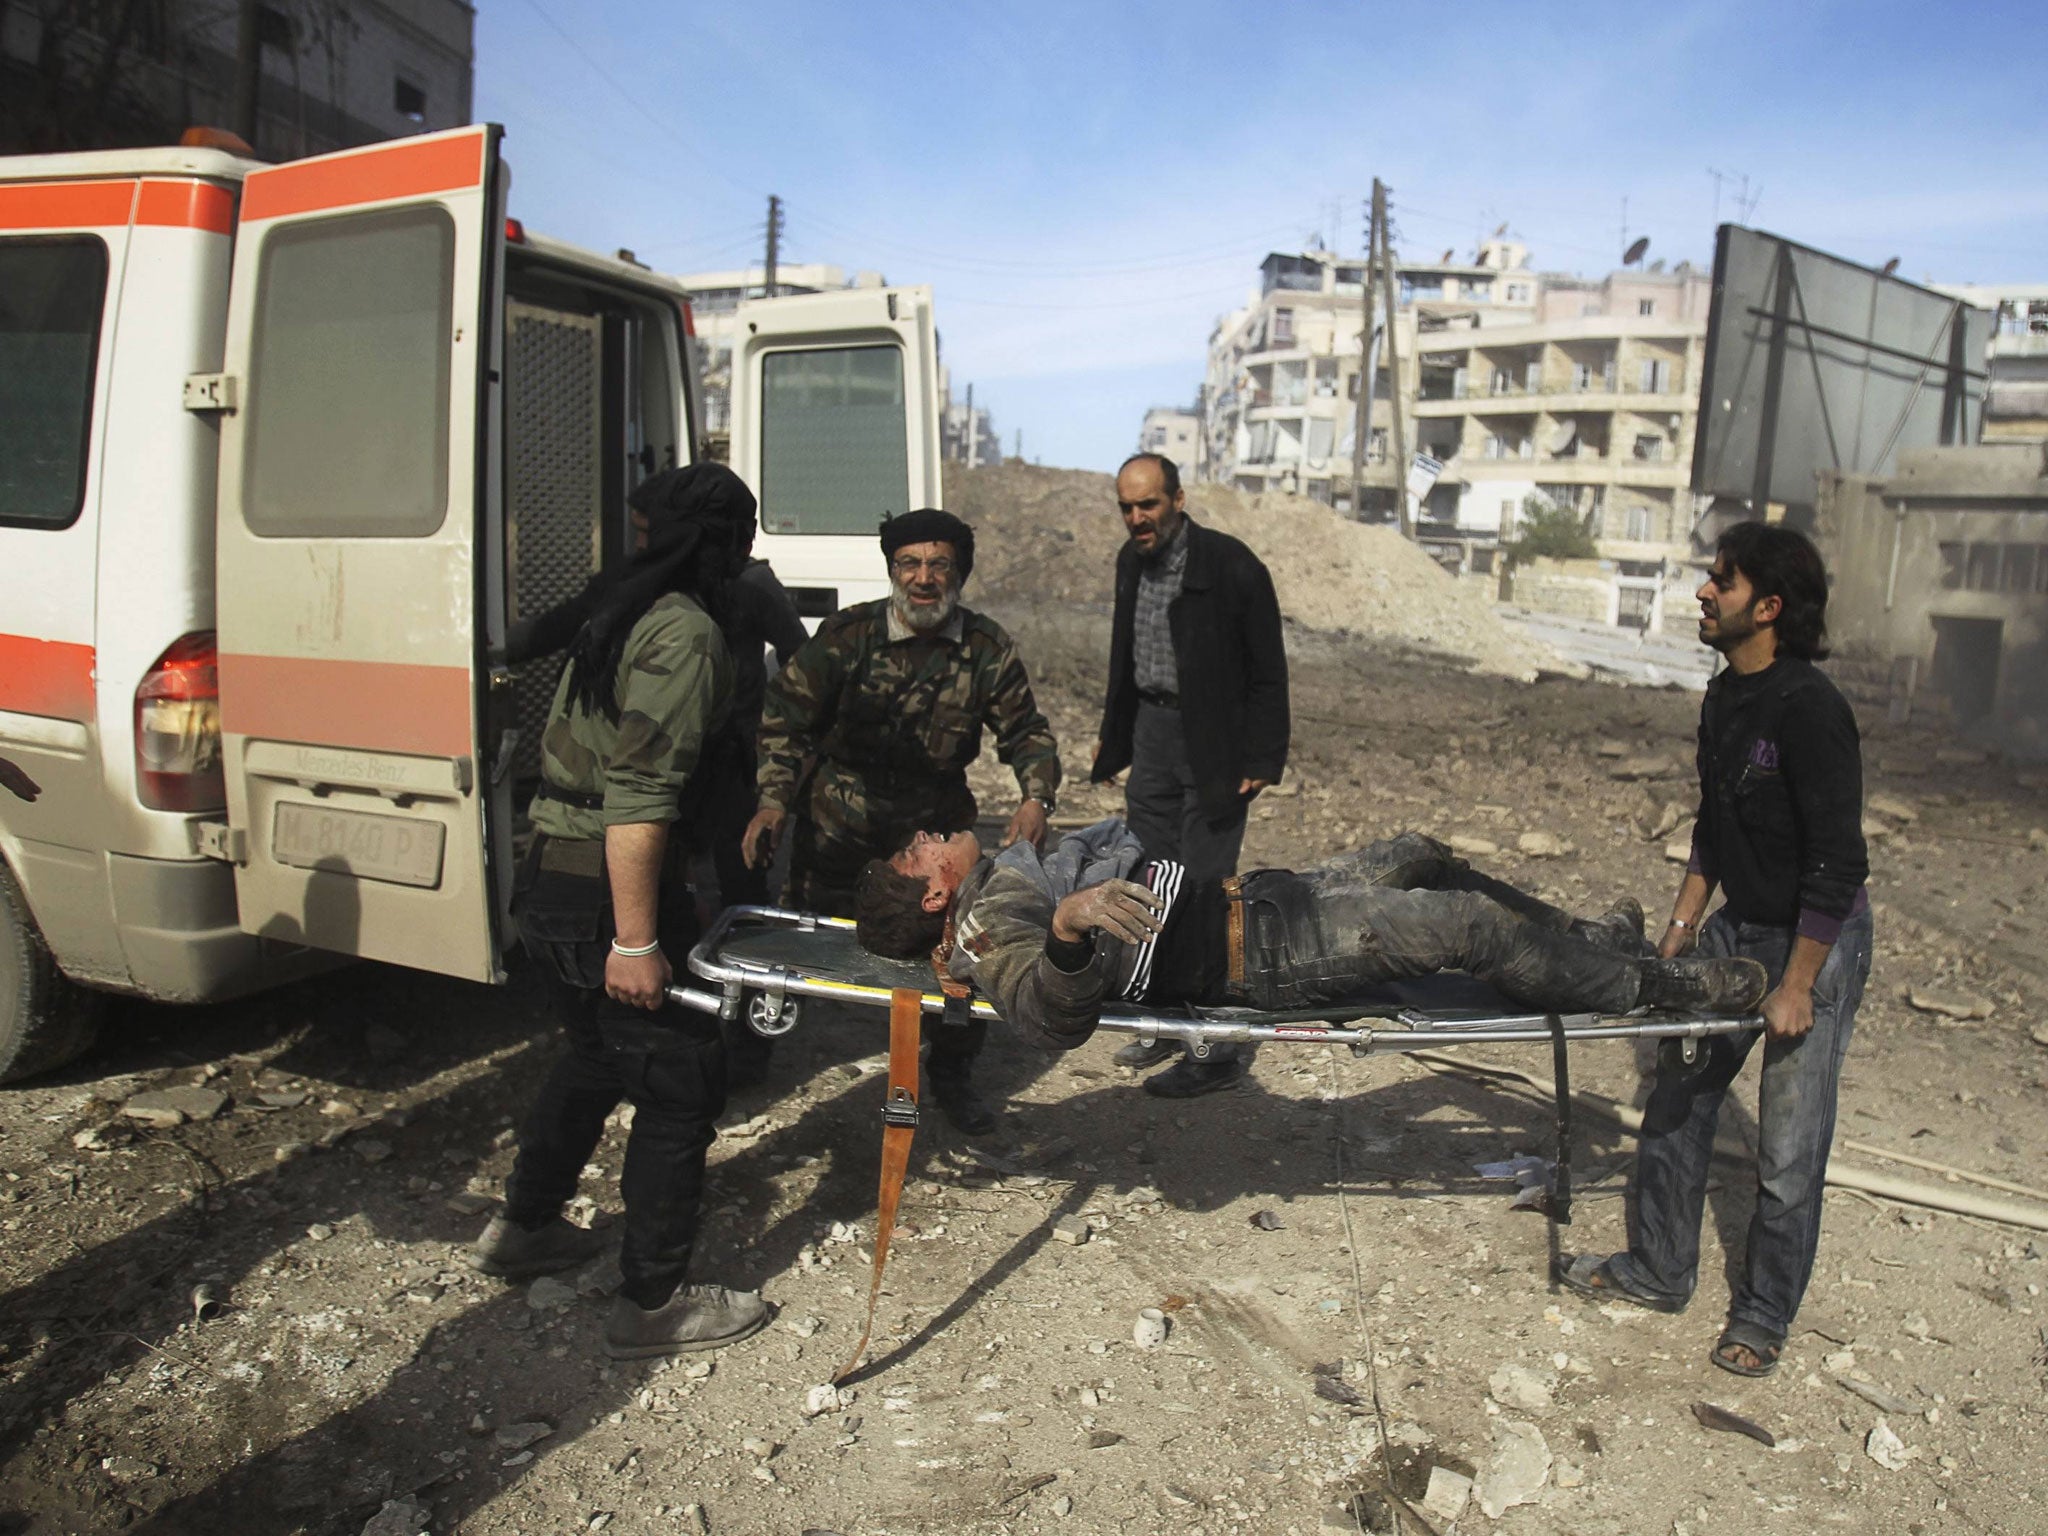 Men hold a wounded civilian on a stretcher at a site hit by what activists said were barrel bombs dropped by government forces in the Al-Ansari neighborhood of Aleppo